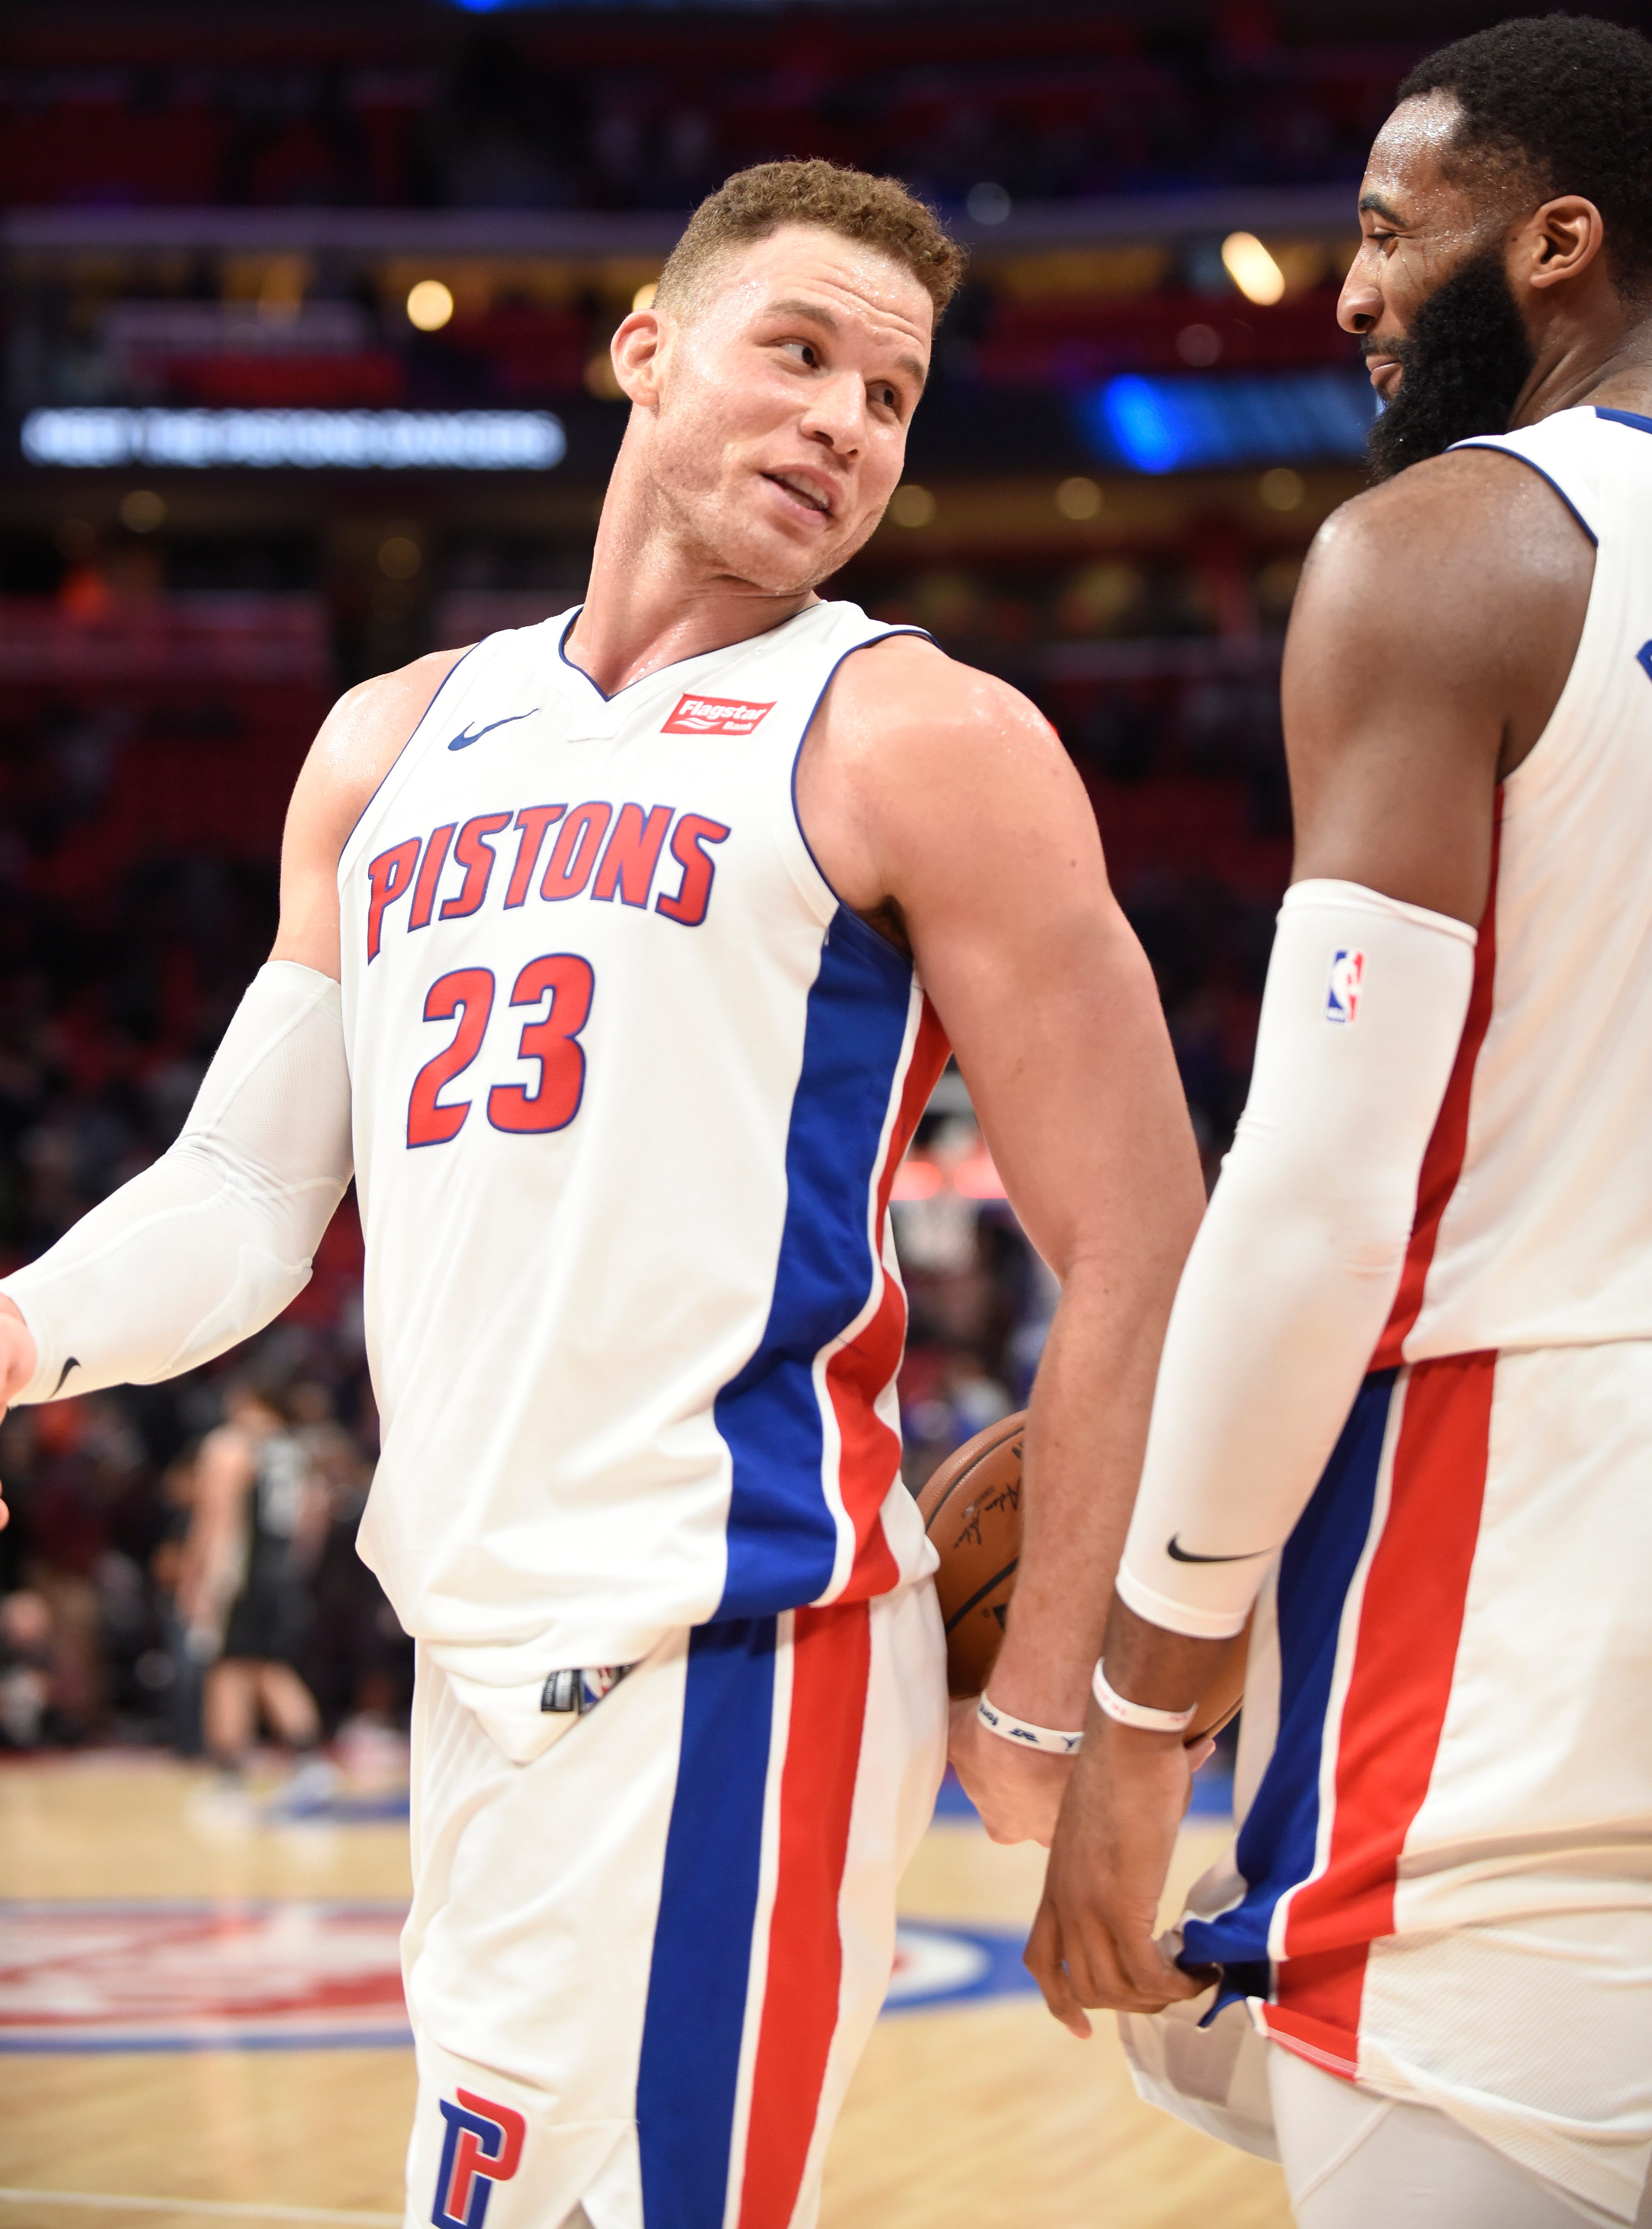 The Pistons' success next season could hinge largely on Blake Griffin's first full season.